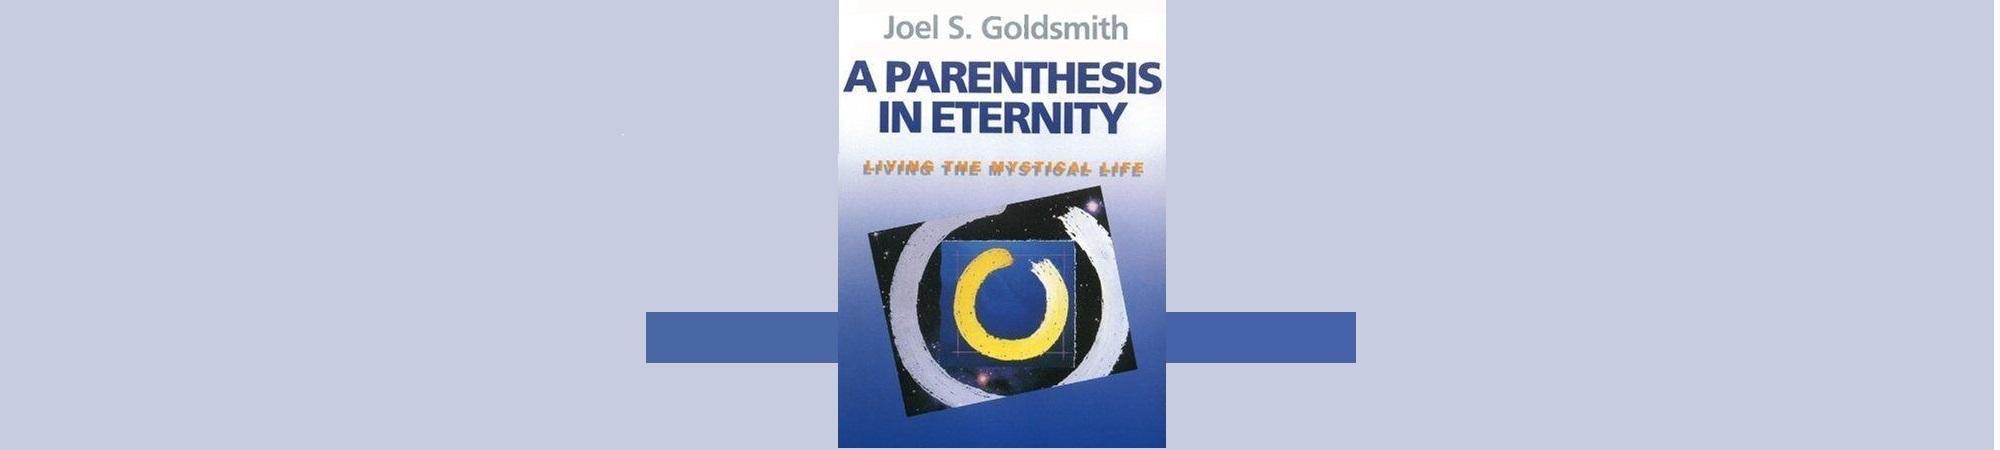 Cover of Joel's book, "A Parentheses in Eternity".